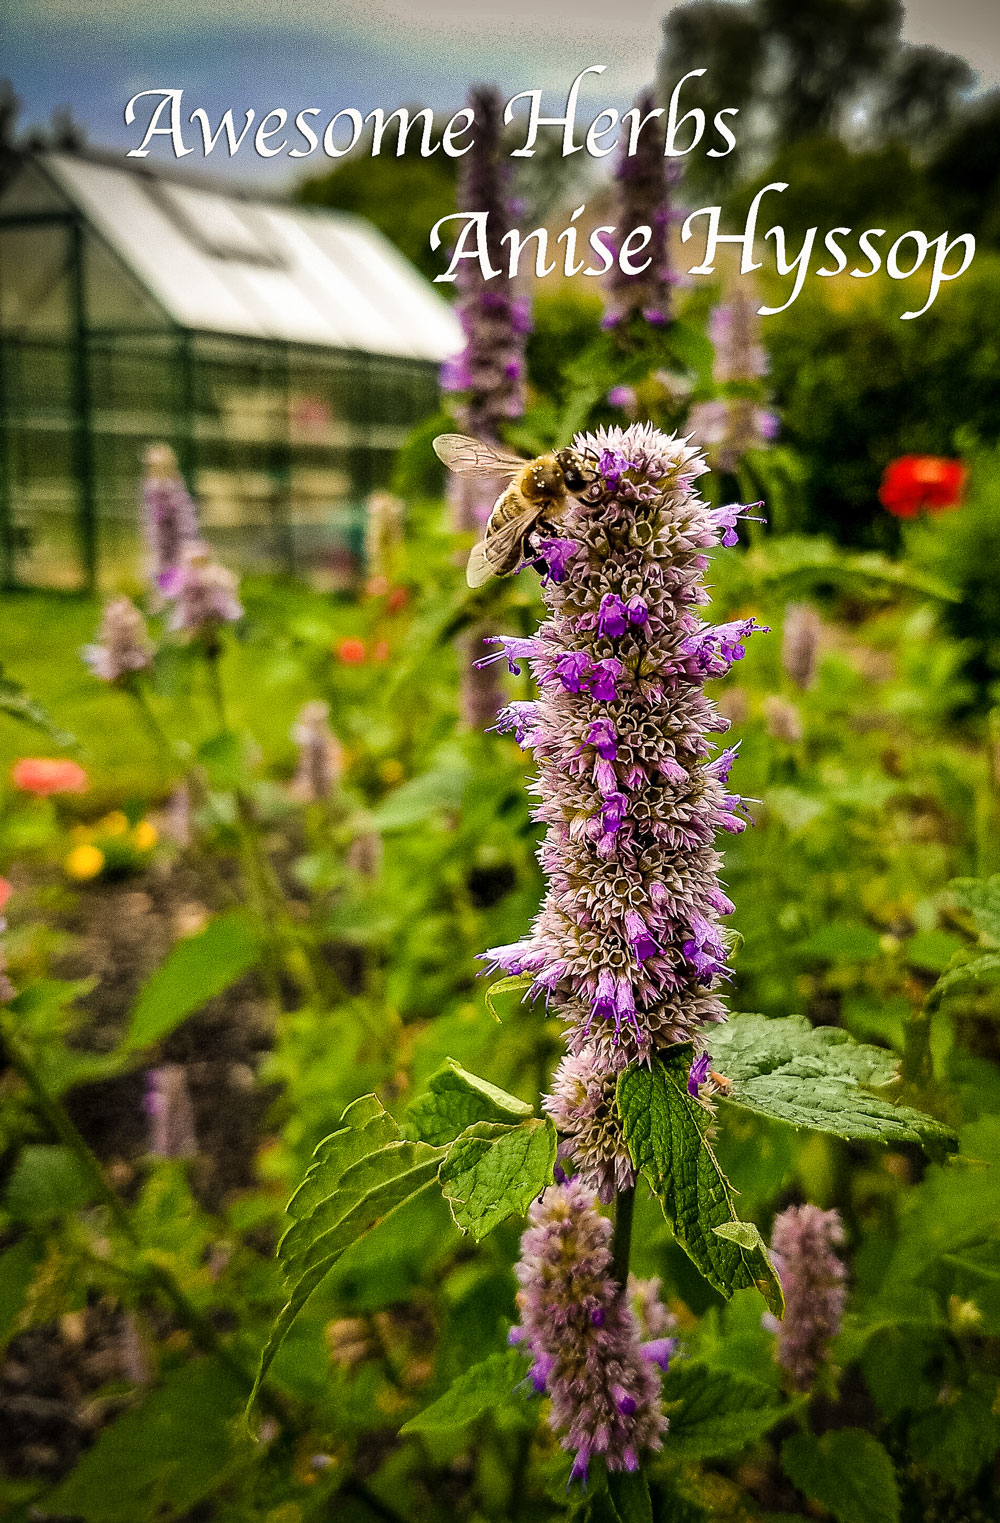 Awesome Herbs - Anise Hyssop